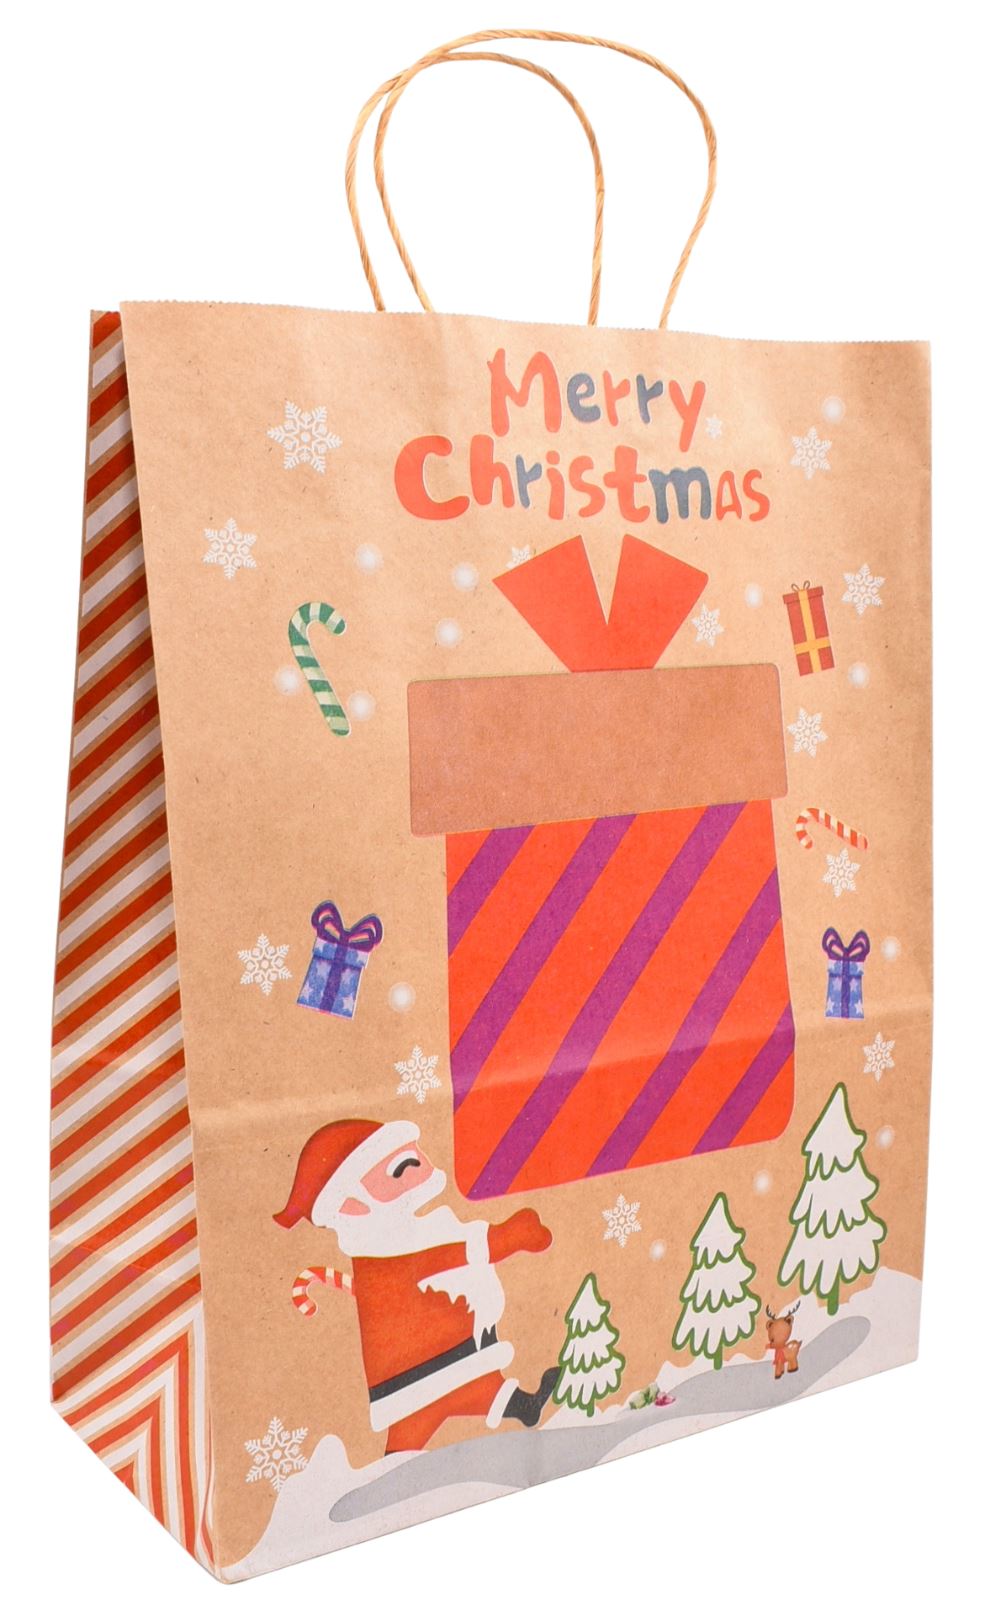 7Pcs Christmas Gift Bags - Brown Recyclable Kraft Paper Present Bags, 33x26x12cm